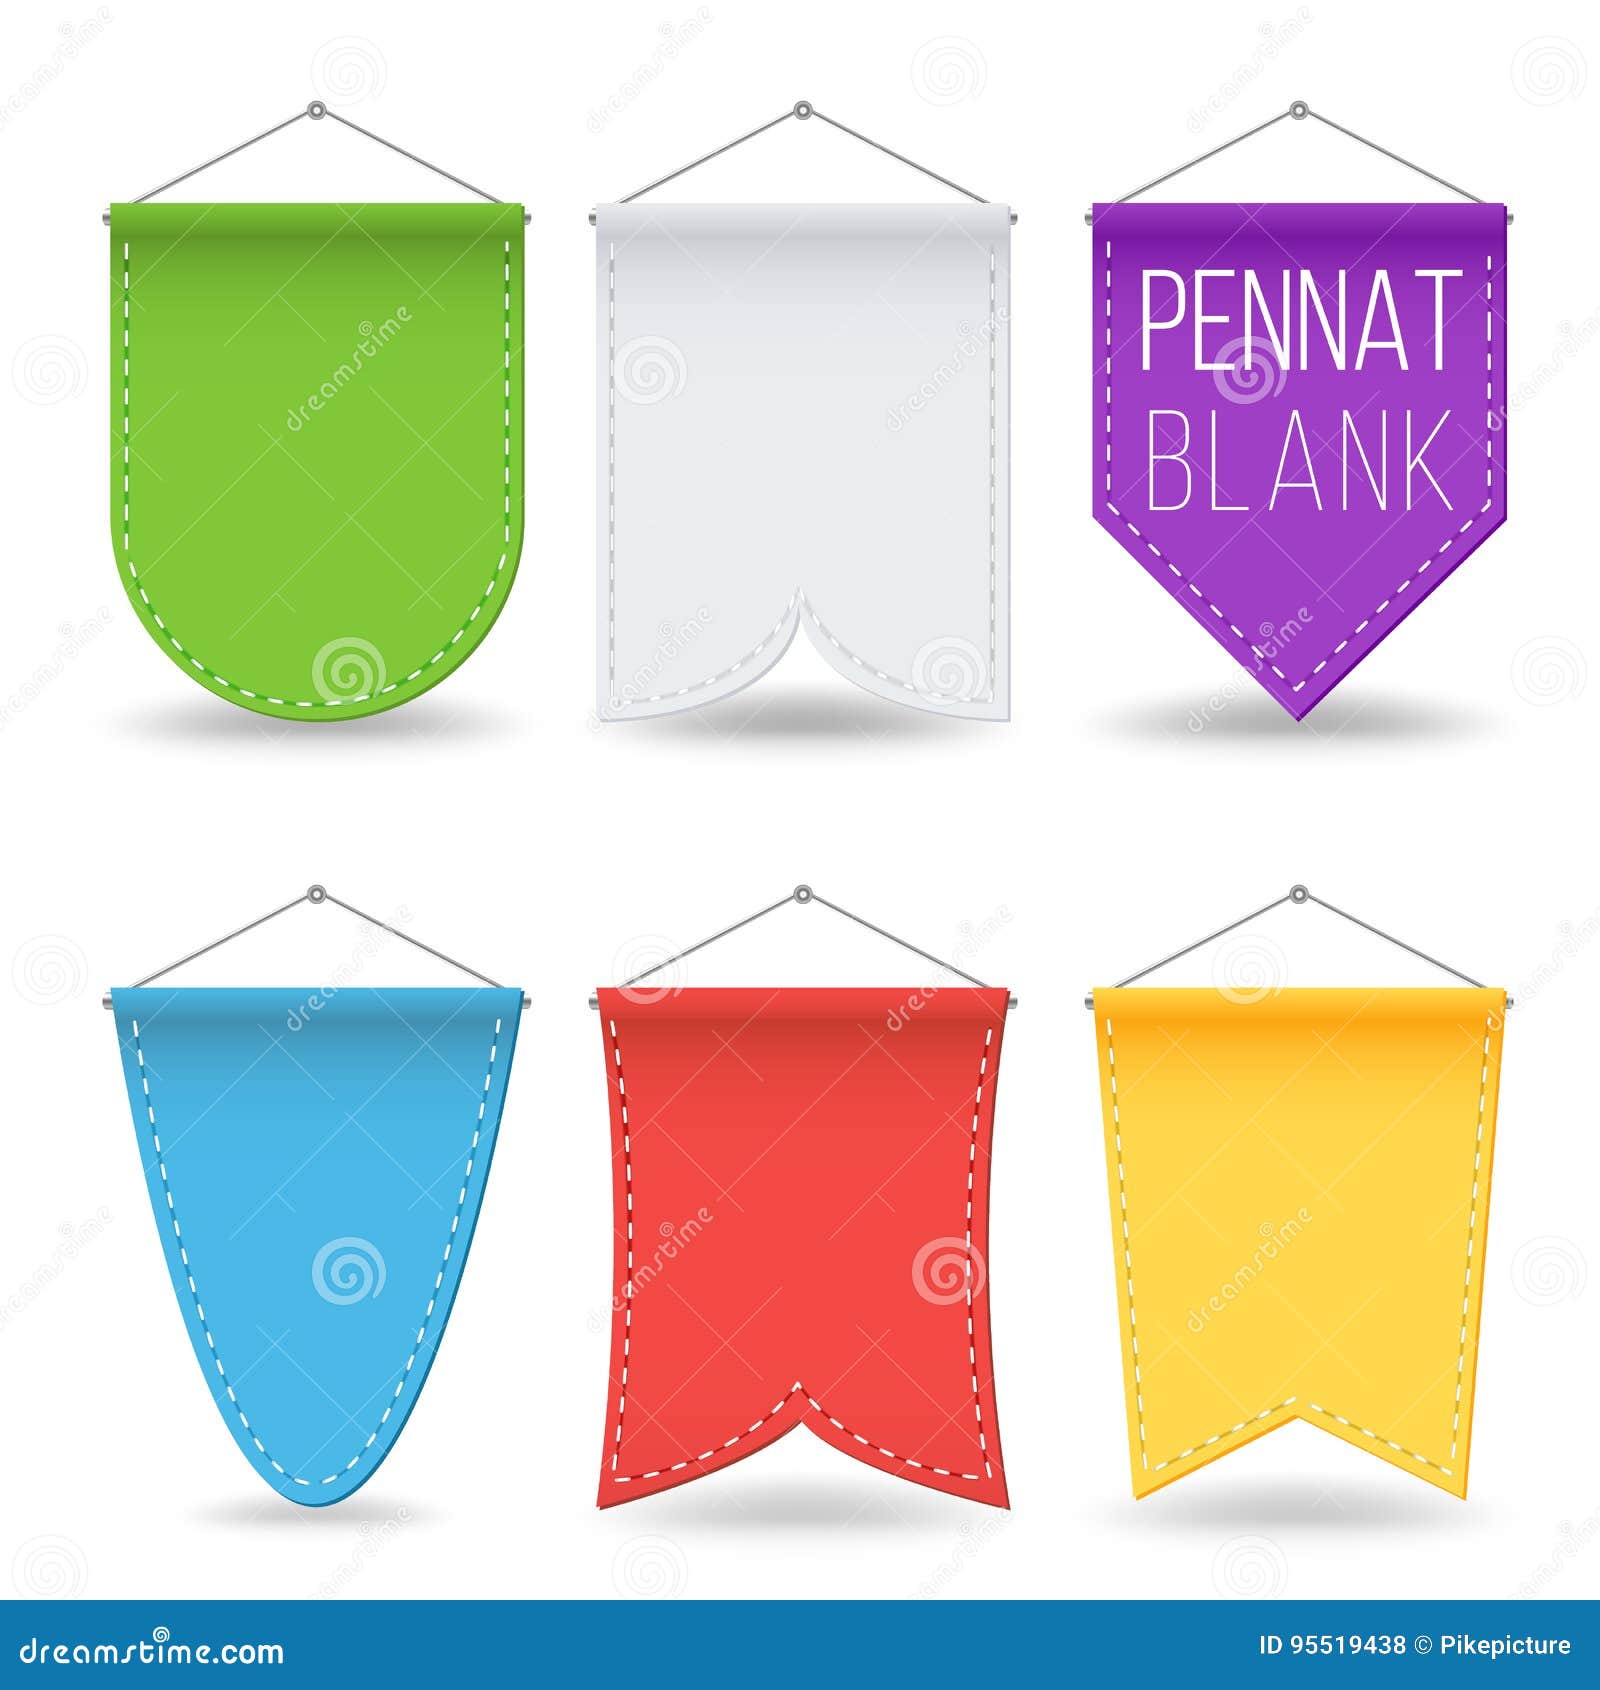 pennant template set . colorful bright hanging empty pennants flags.  